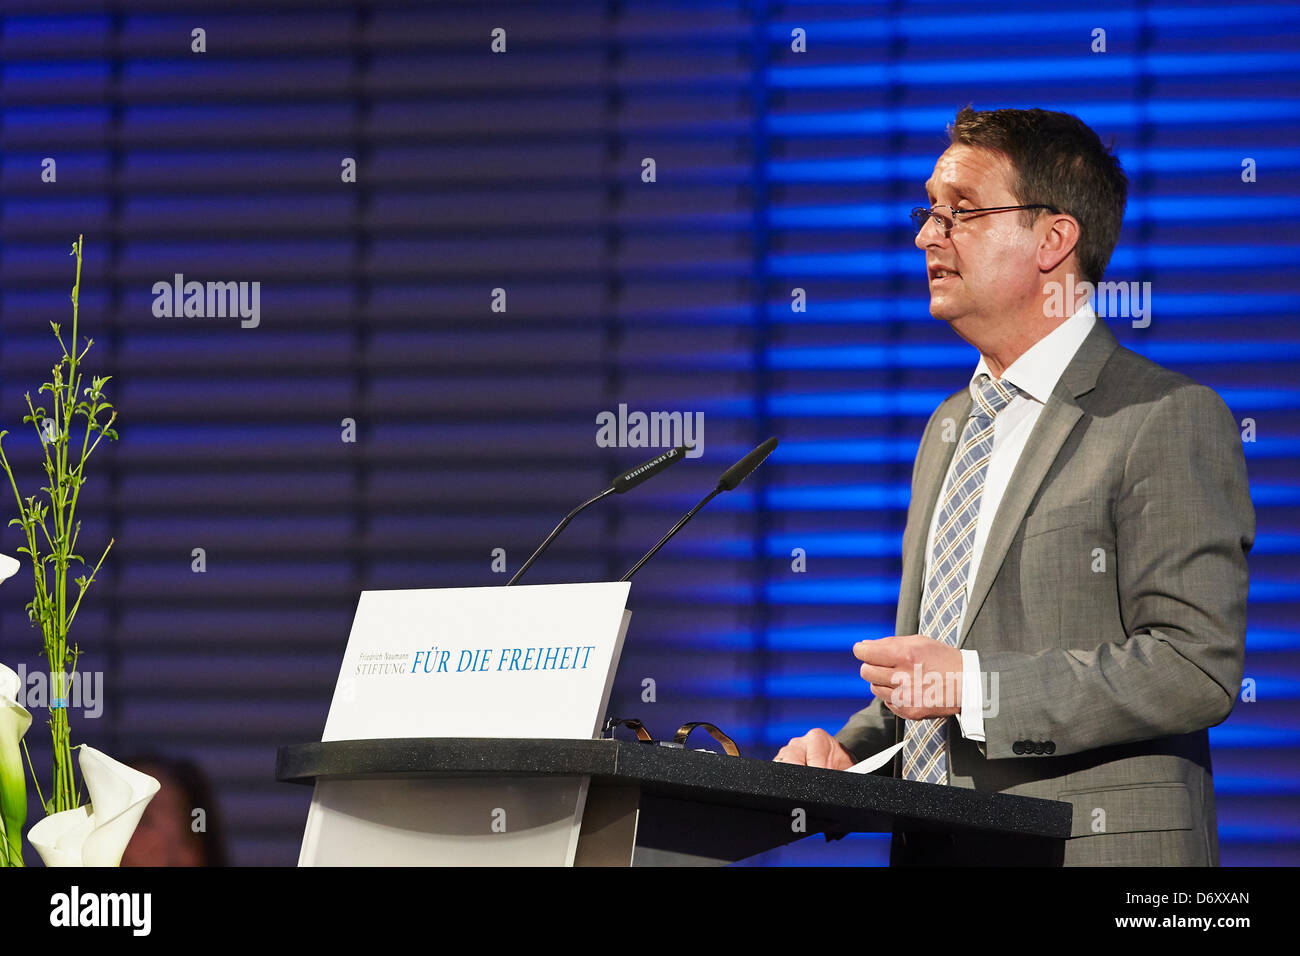 Berlin, 24 April, 2013. Gabor Steingart, a managing director of the ...